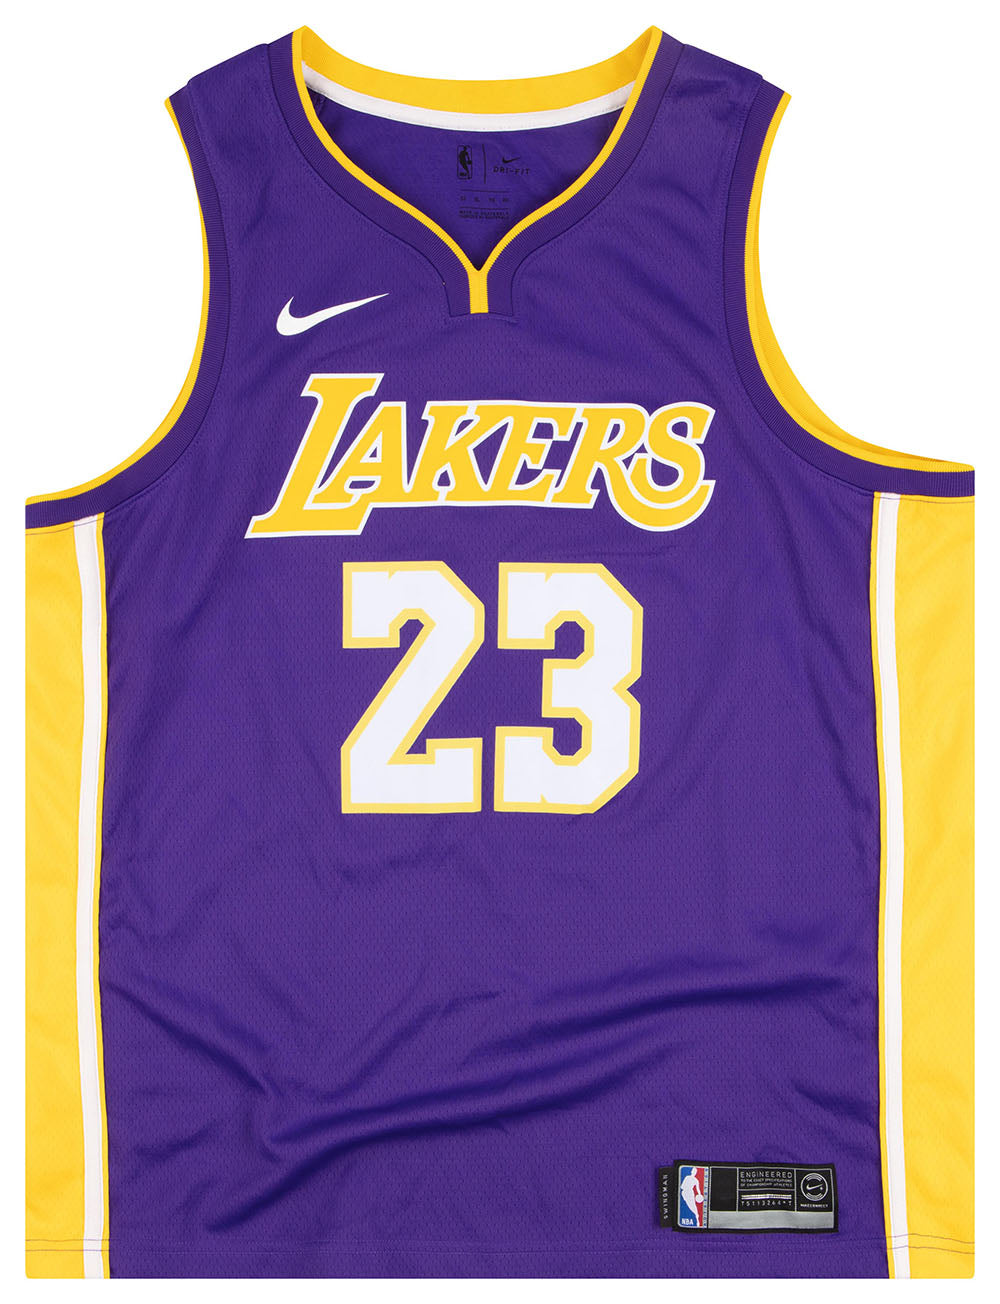 lakers 17-18 city jersey